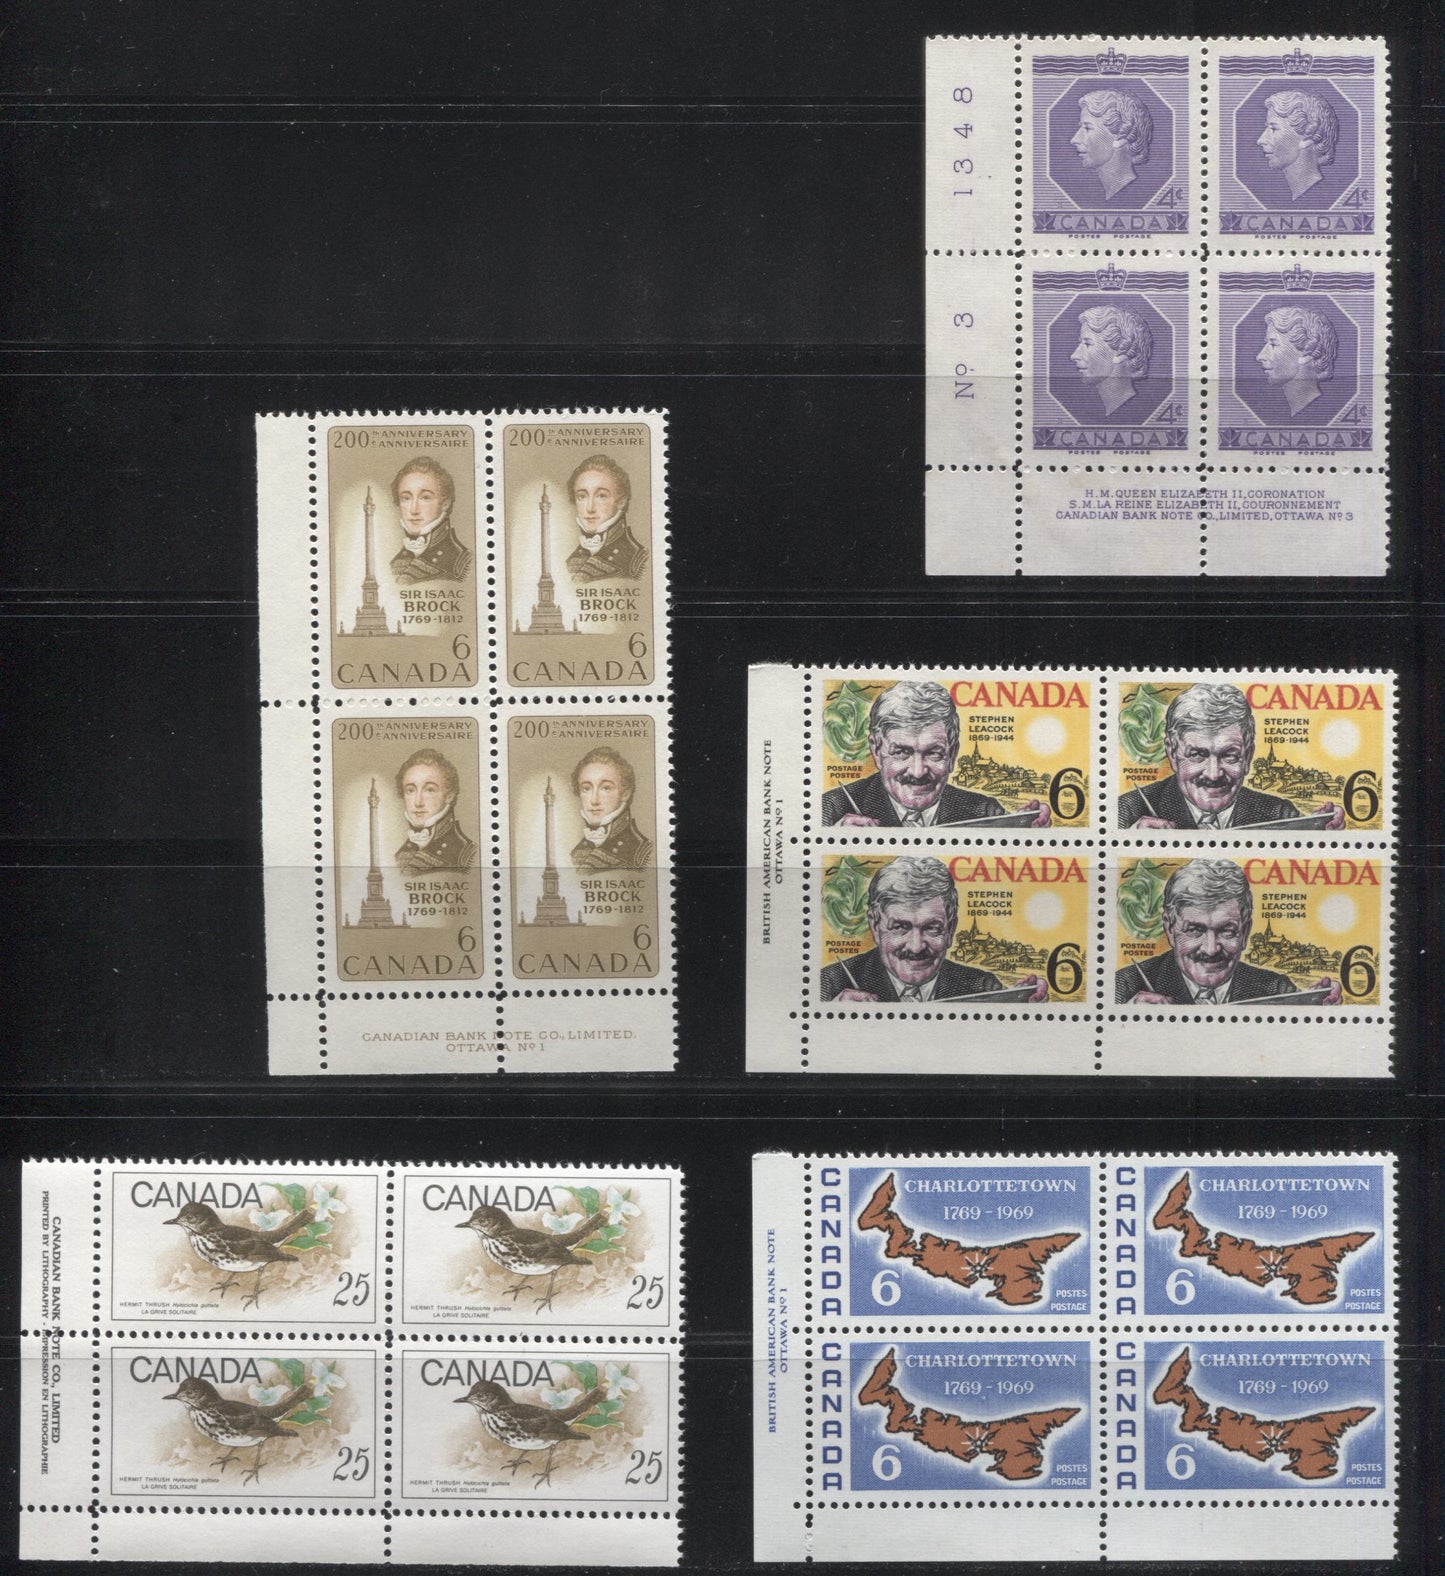 Lot 99 Canada #330, 498-499, 501, 504 4c, 6c & 25c Violet - Multicolored Queen Elizabeth II - Leacock And Mariposa, 1953-1969 Commemoratives, 5 VFNH LL Plate 1 & 3 Blocks Of 4 On Dull & HB Papers